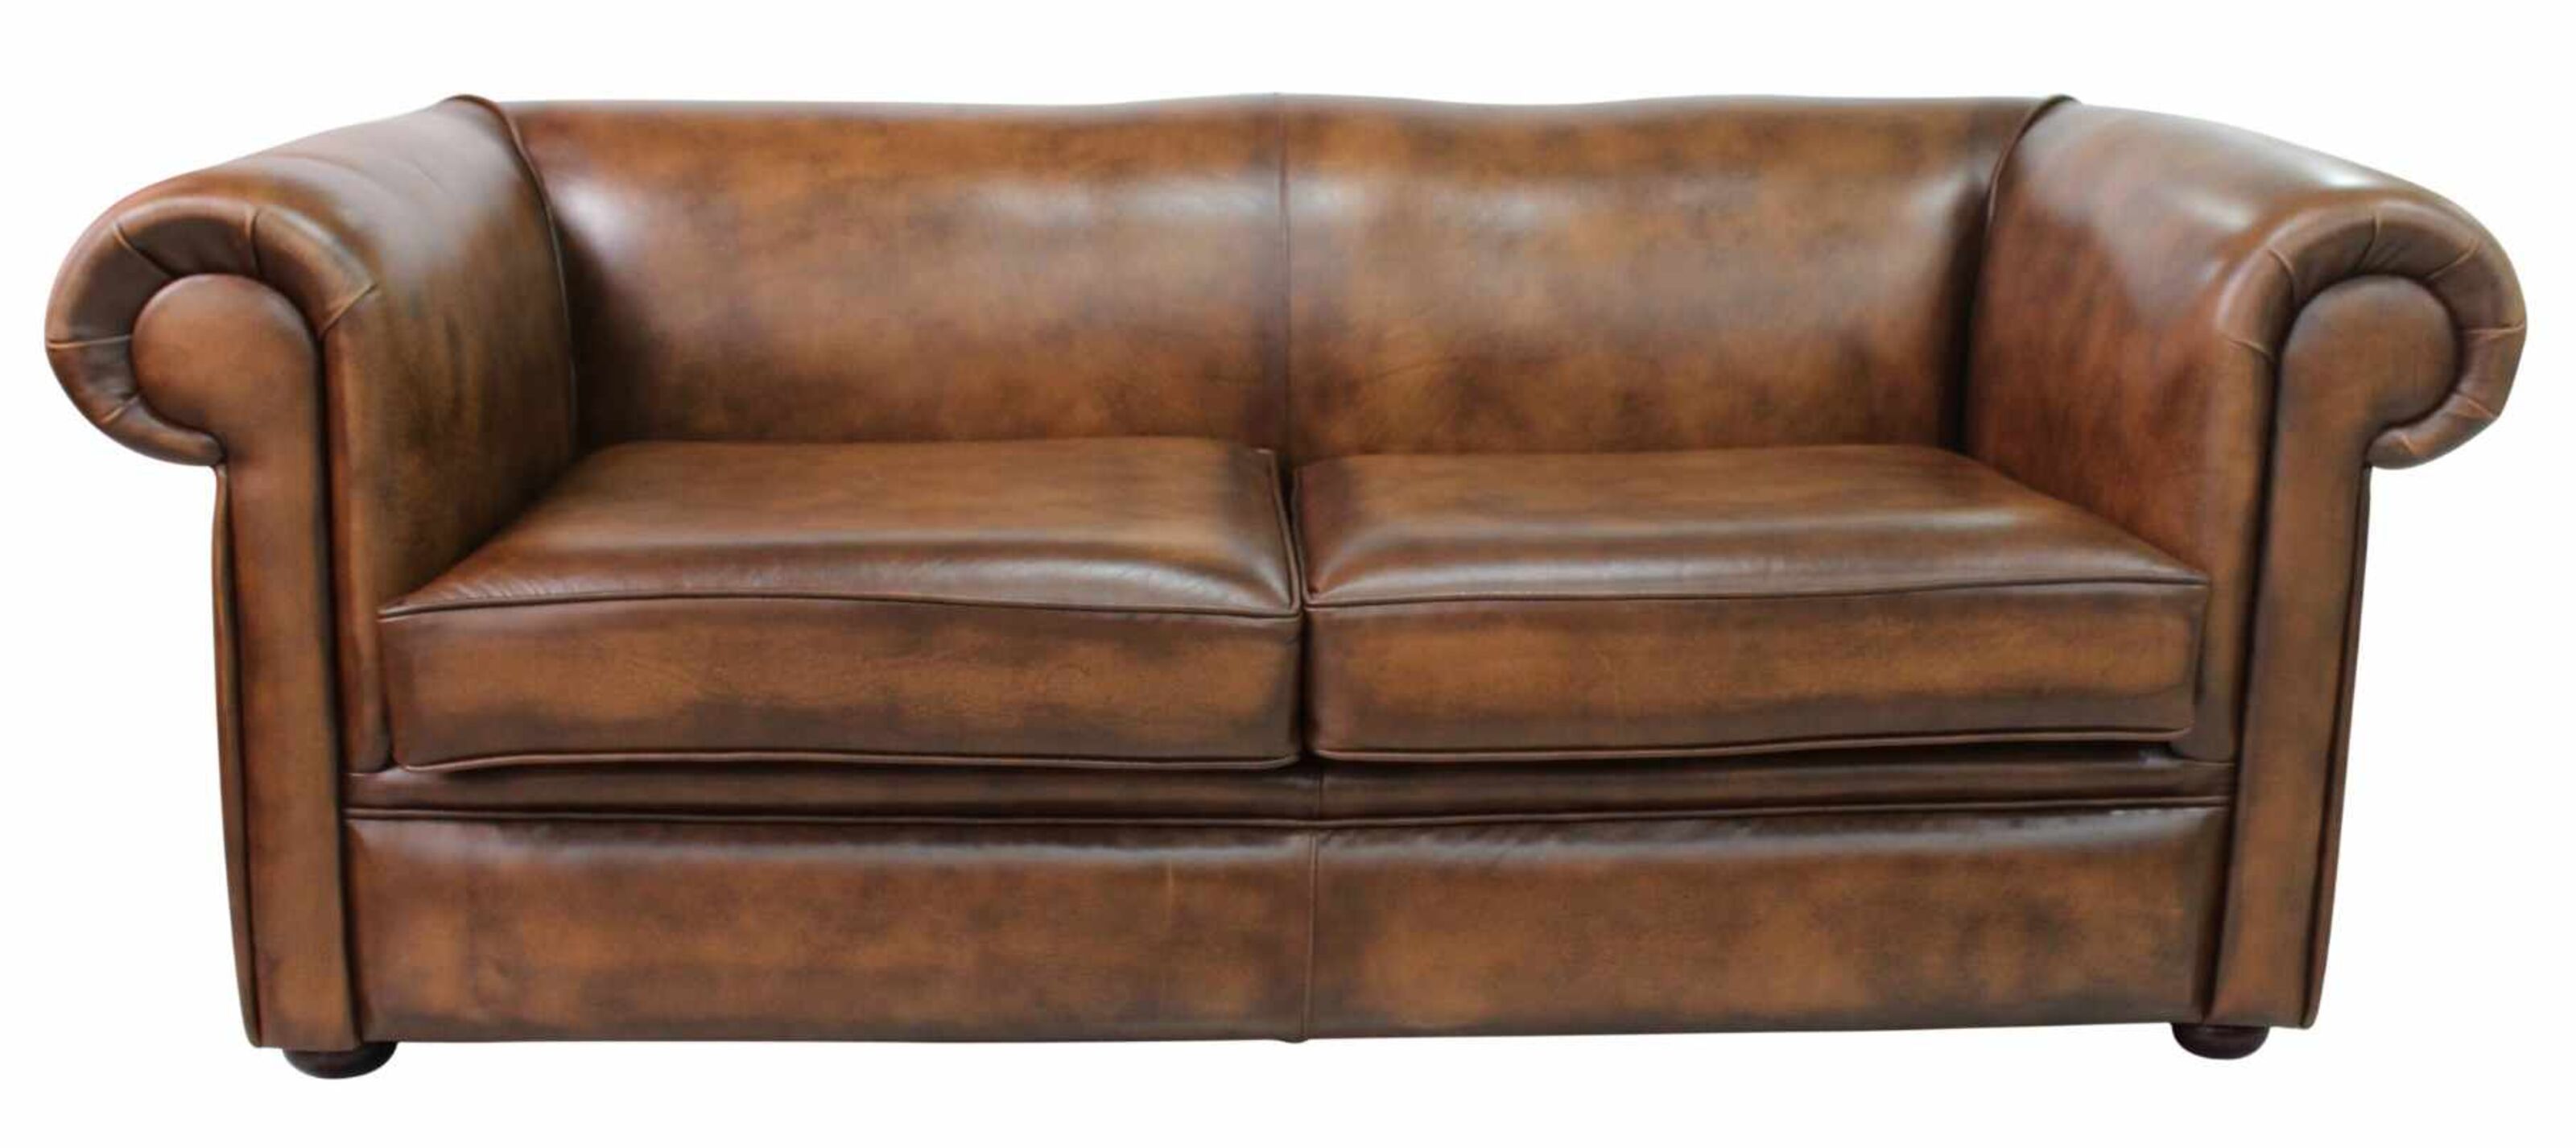 Pillowed Perfection: Chesterfield Sofas with Cushioned Comfort  %Post Title